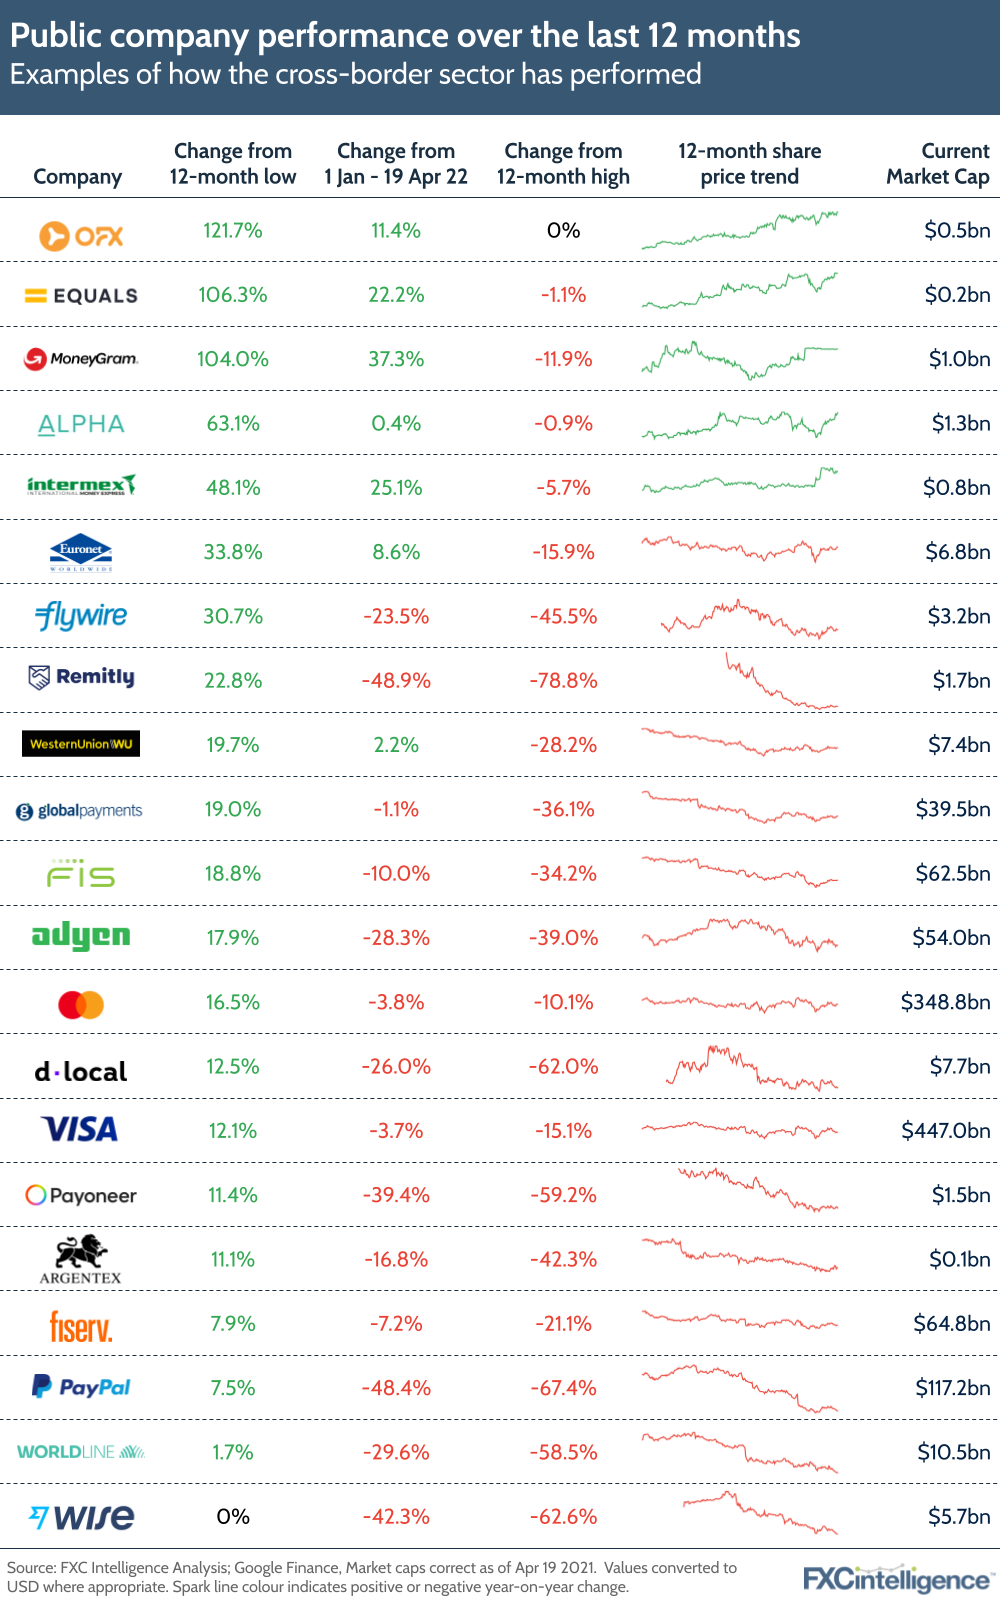 Public company performance over the past 12 months - examples of how the global payments sector stocks have performed